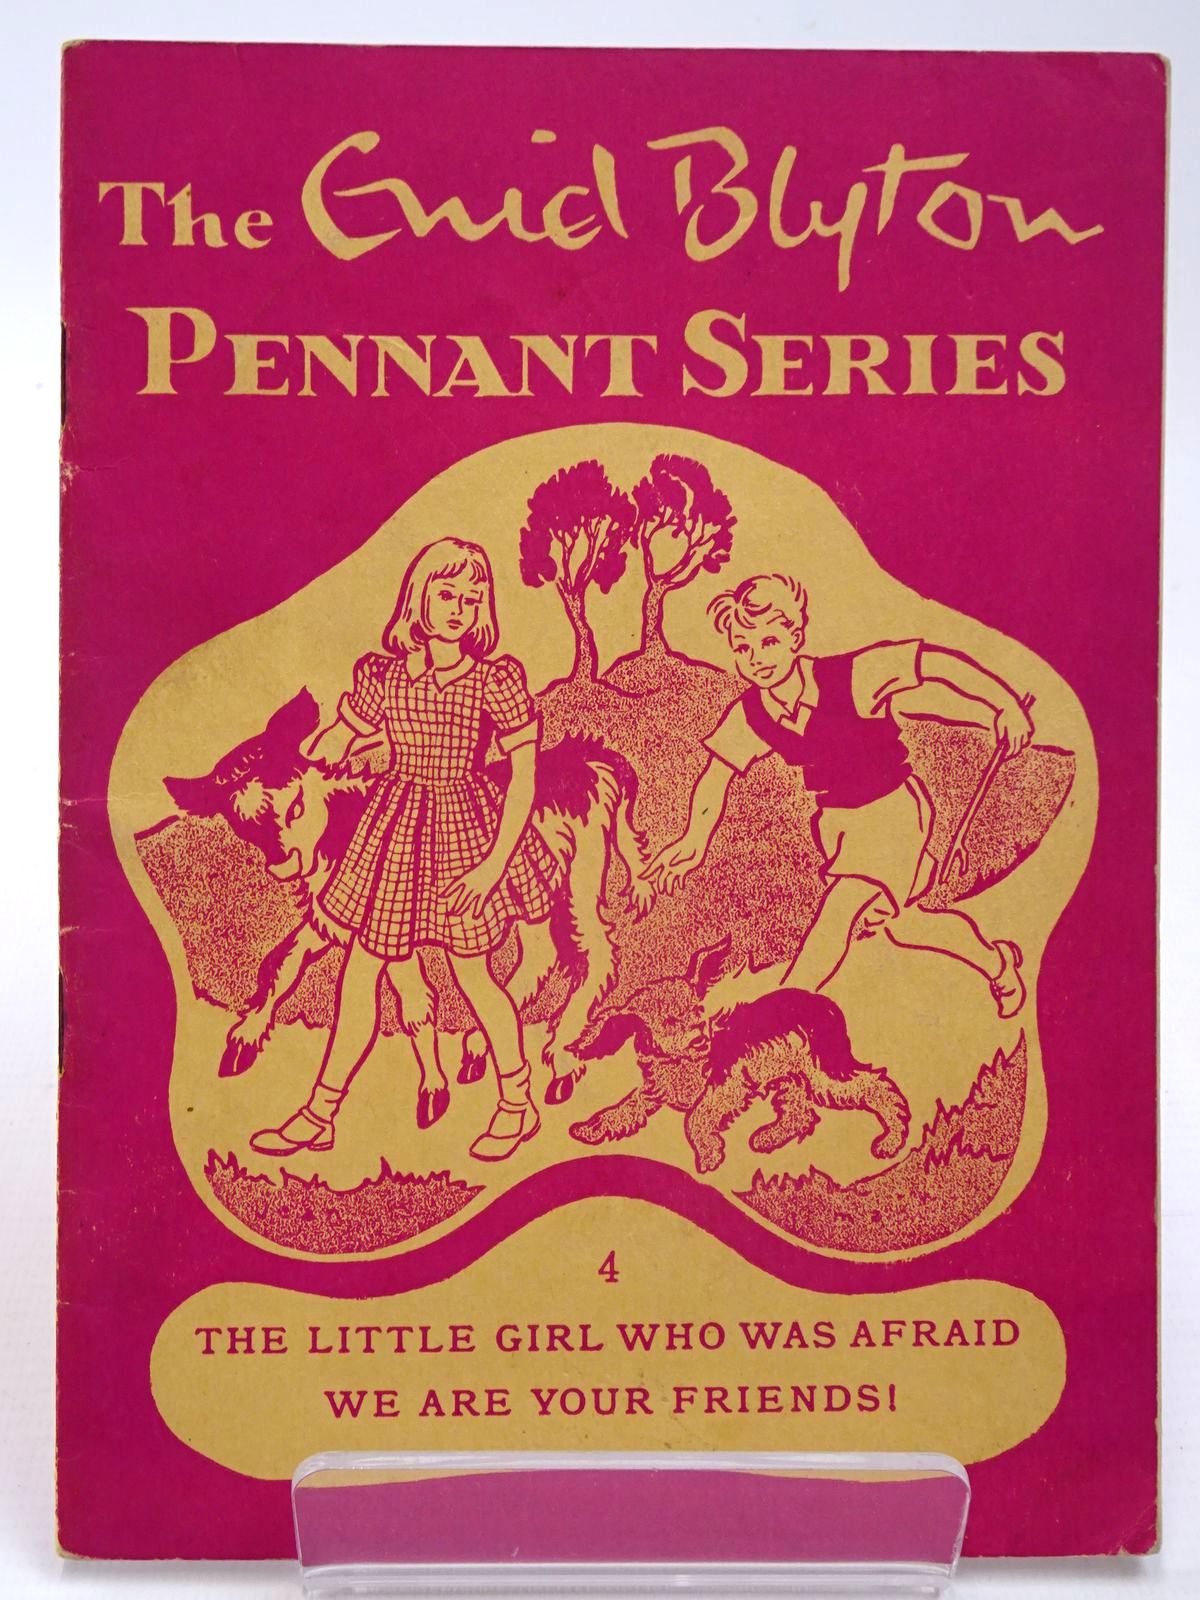 Photo of THE ENID BLYTON PENNANT SERIES No. 4 THE LITTLE GIRL WHO WAS AFRAID / WE ARE YOUR FRIENDS! written by Blyton, Enid illustrated by Main, Jean published by Macmillan & Co. Ltd. (STOCK CODE: 2130524)  for sale by Stella & Rose's Books